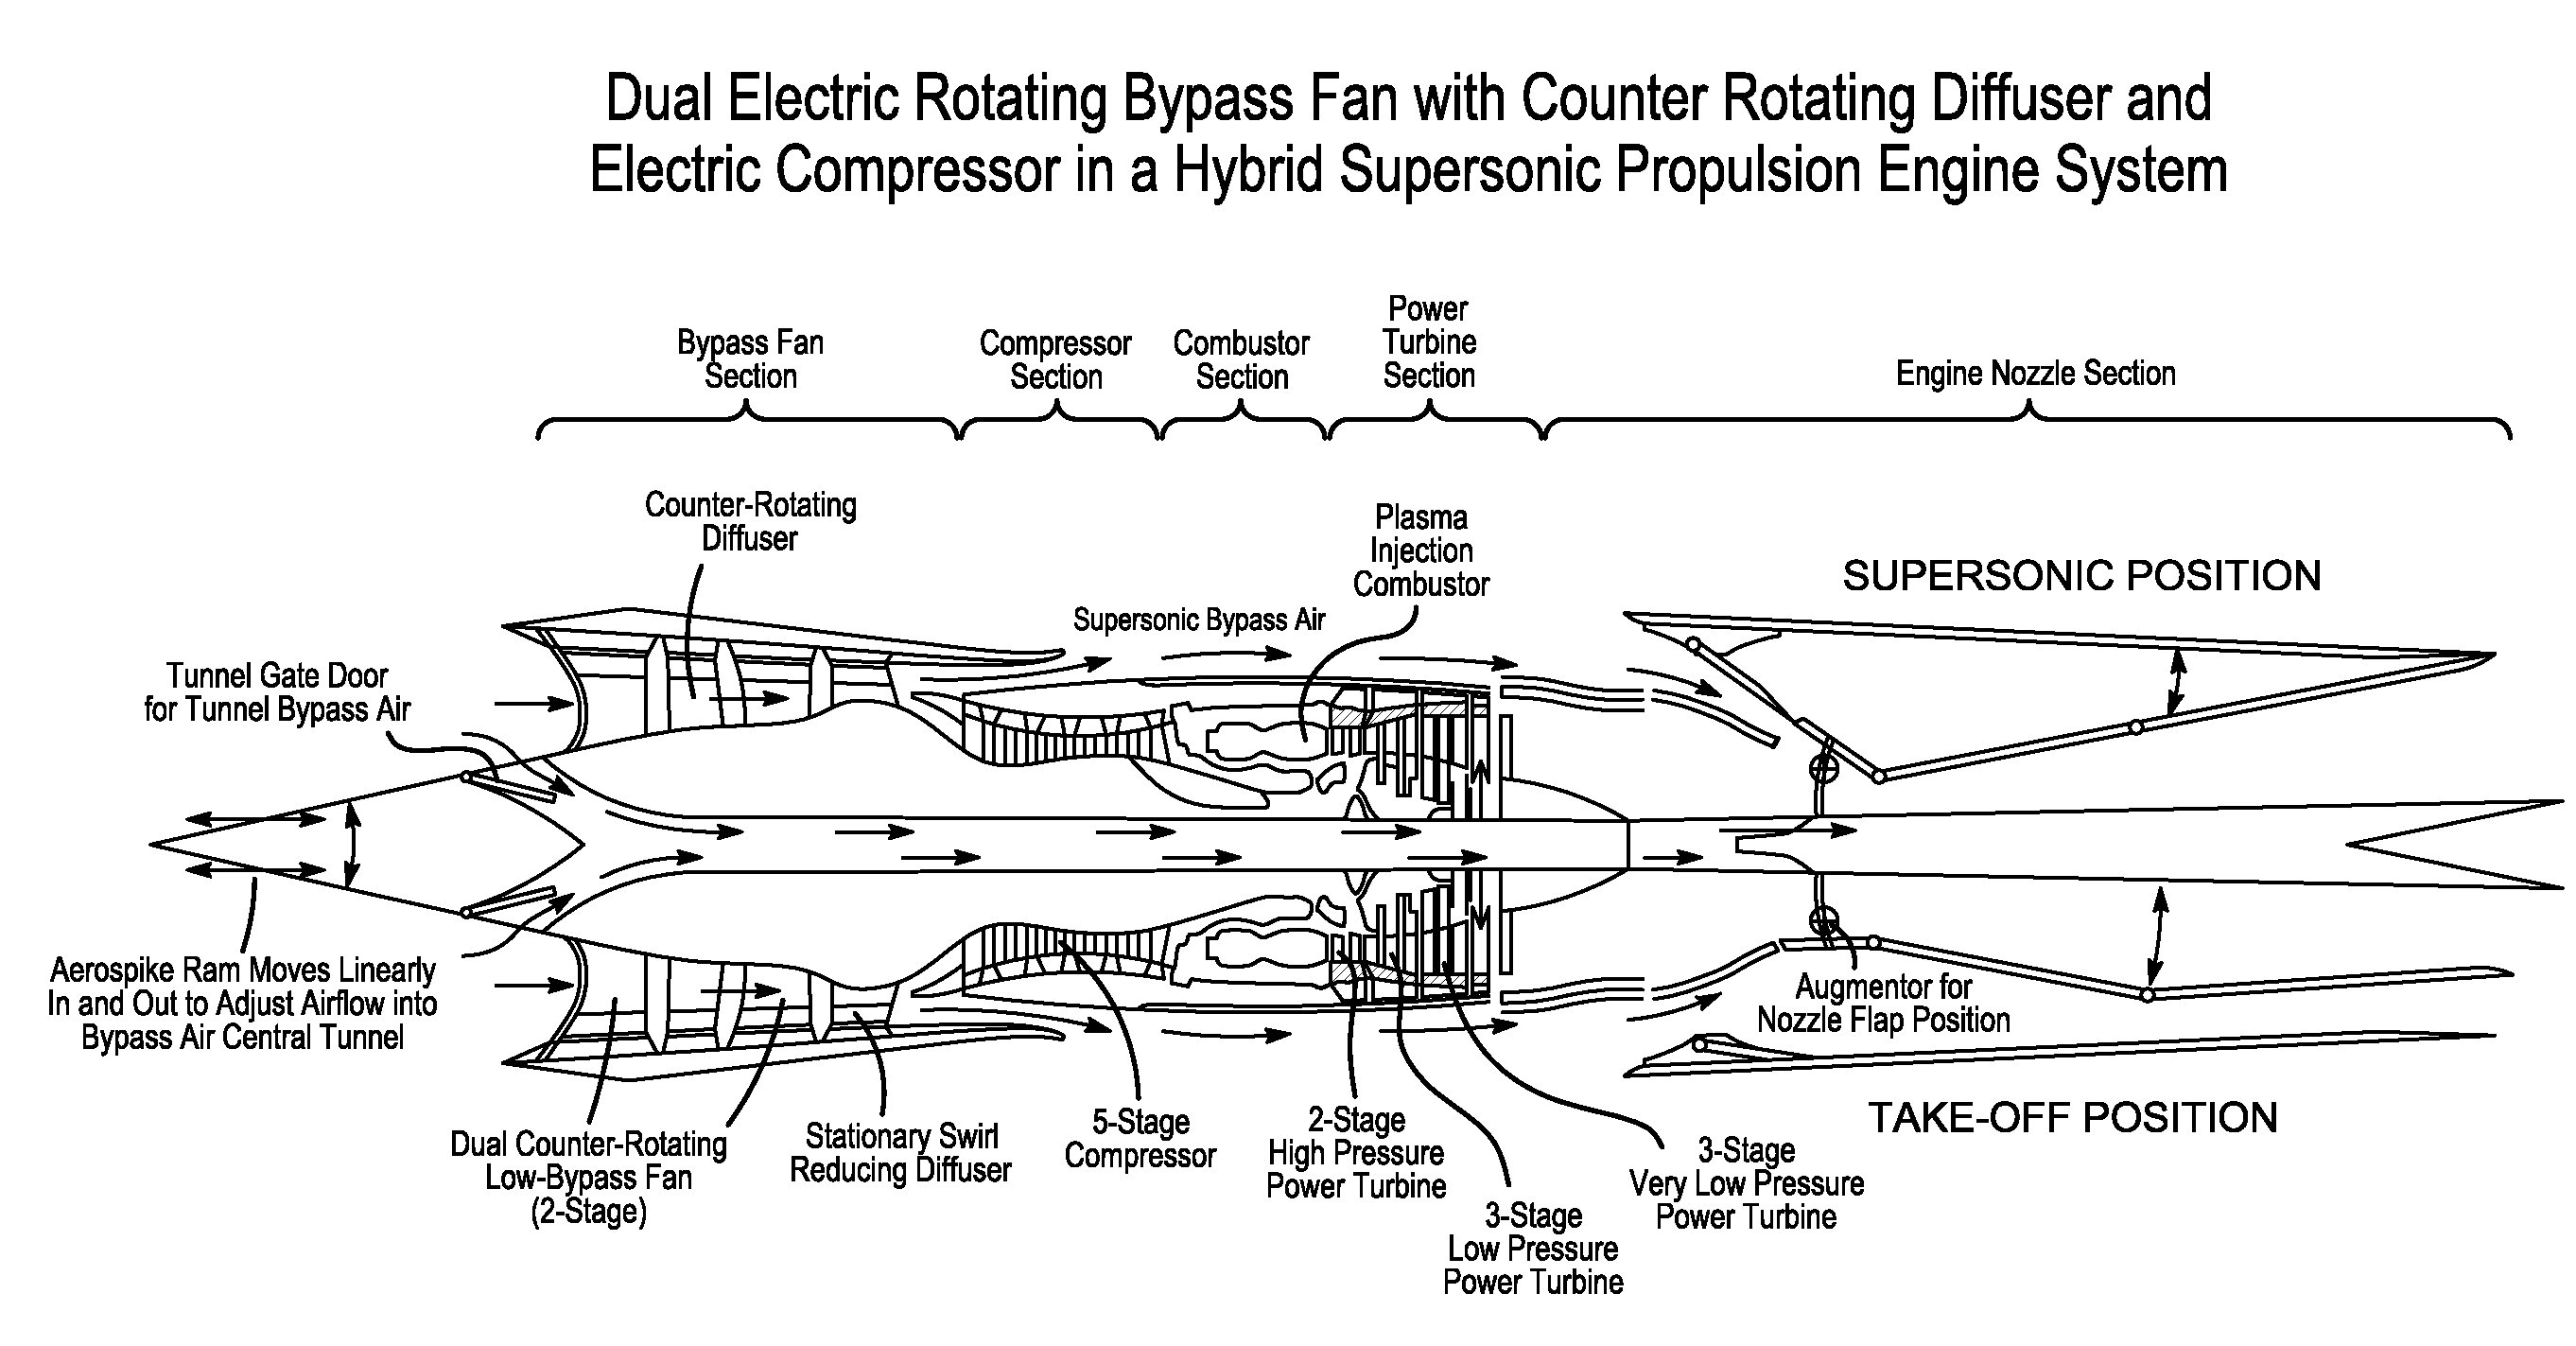 Electric turbine bypass fan and compressor for hybrid propulsion